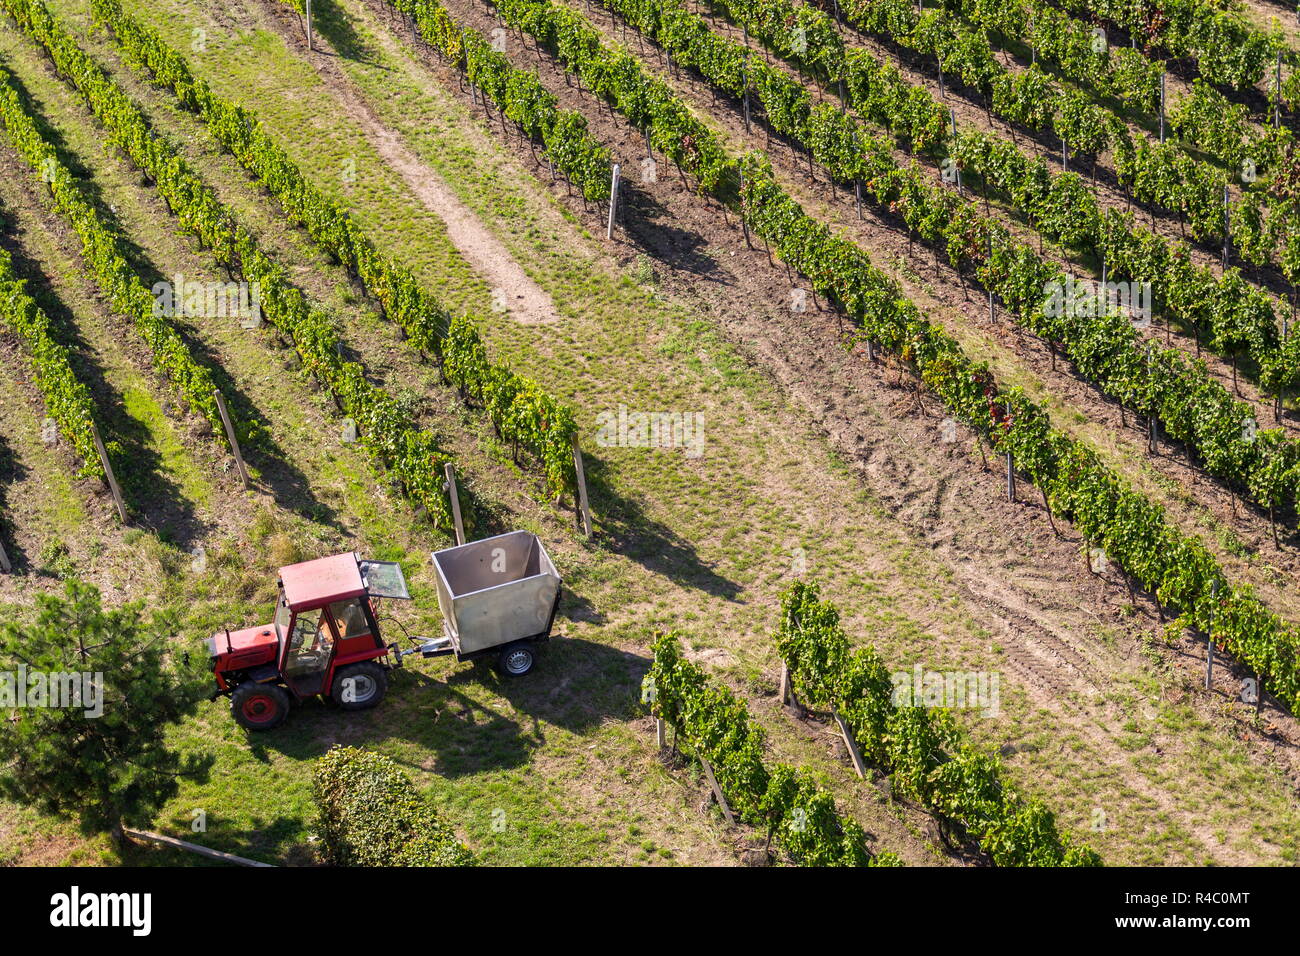 Red tractor ready for harvesting grapes in vineyard, sunny autumn day, Southern Moravia, Czech Republic Stock Photo